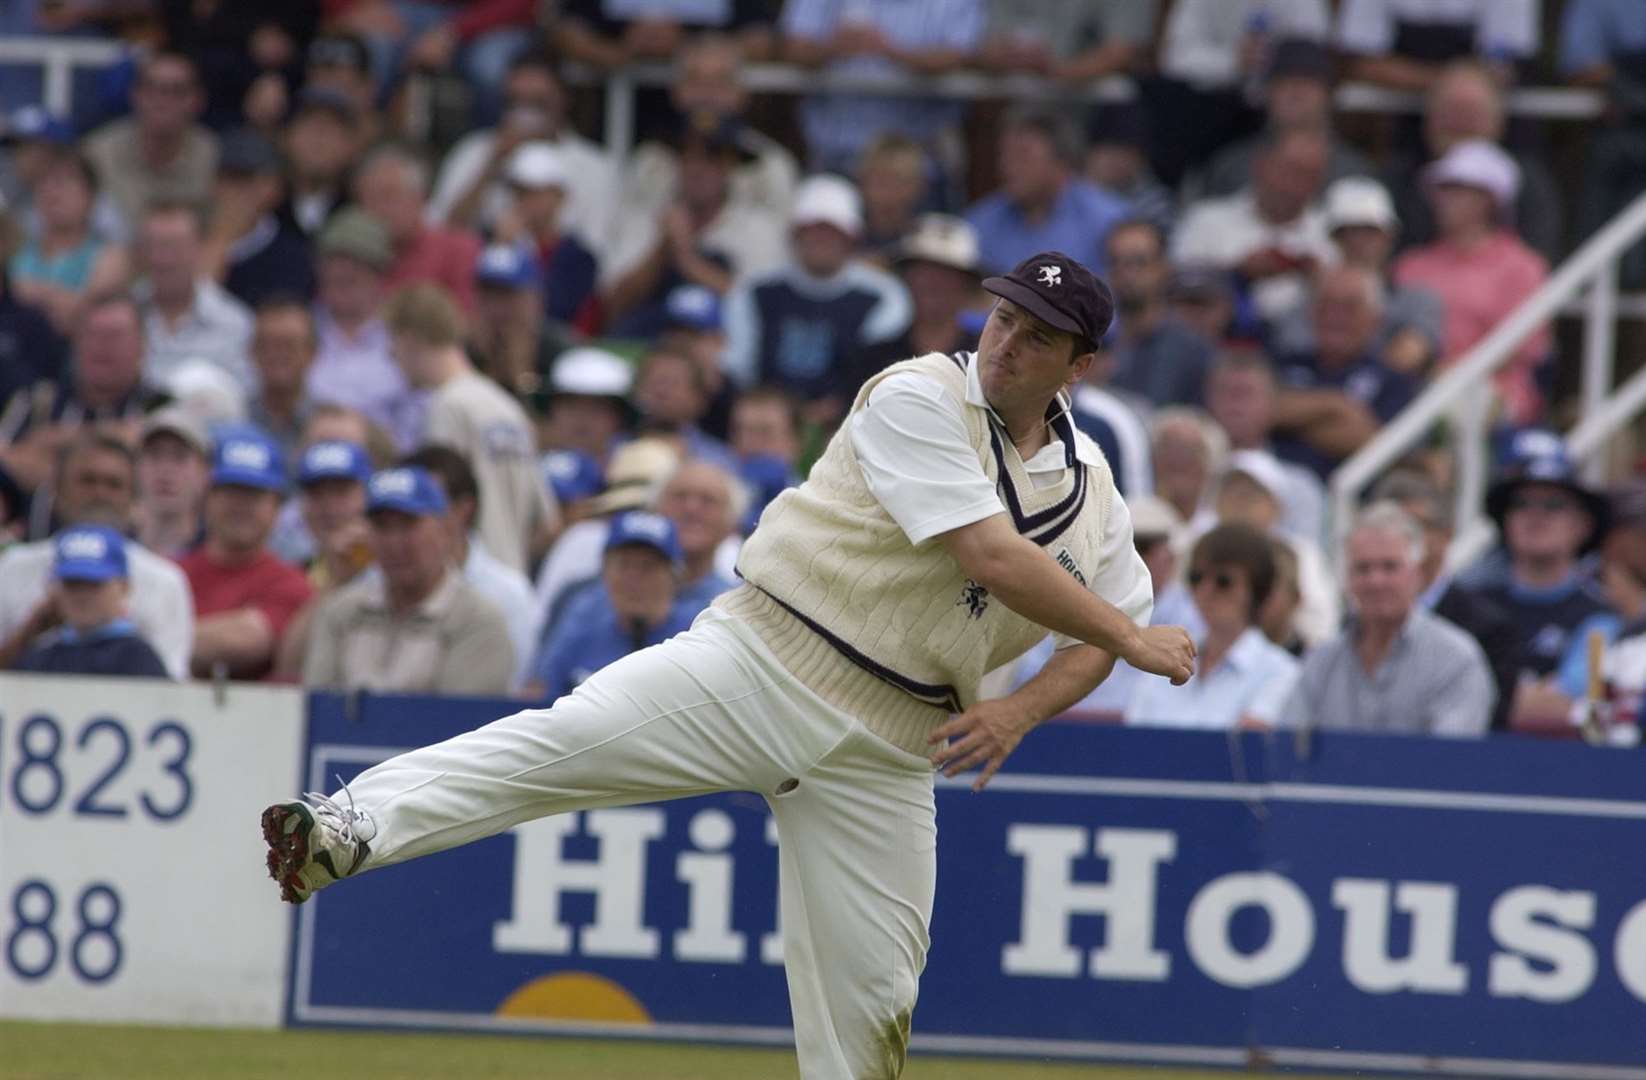 Kent's Mark Ealham was in the England team when Canterbury hosted a group game in the Cricket World Cup 1999 - a tournament the national team bowed out of at the first hurdle